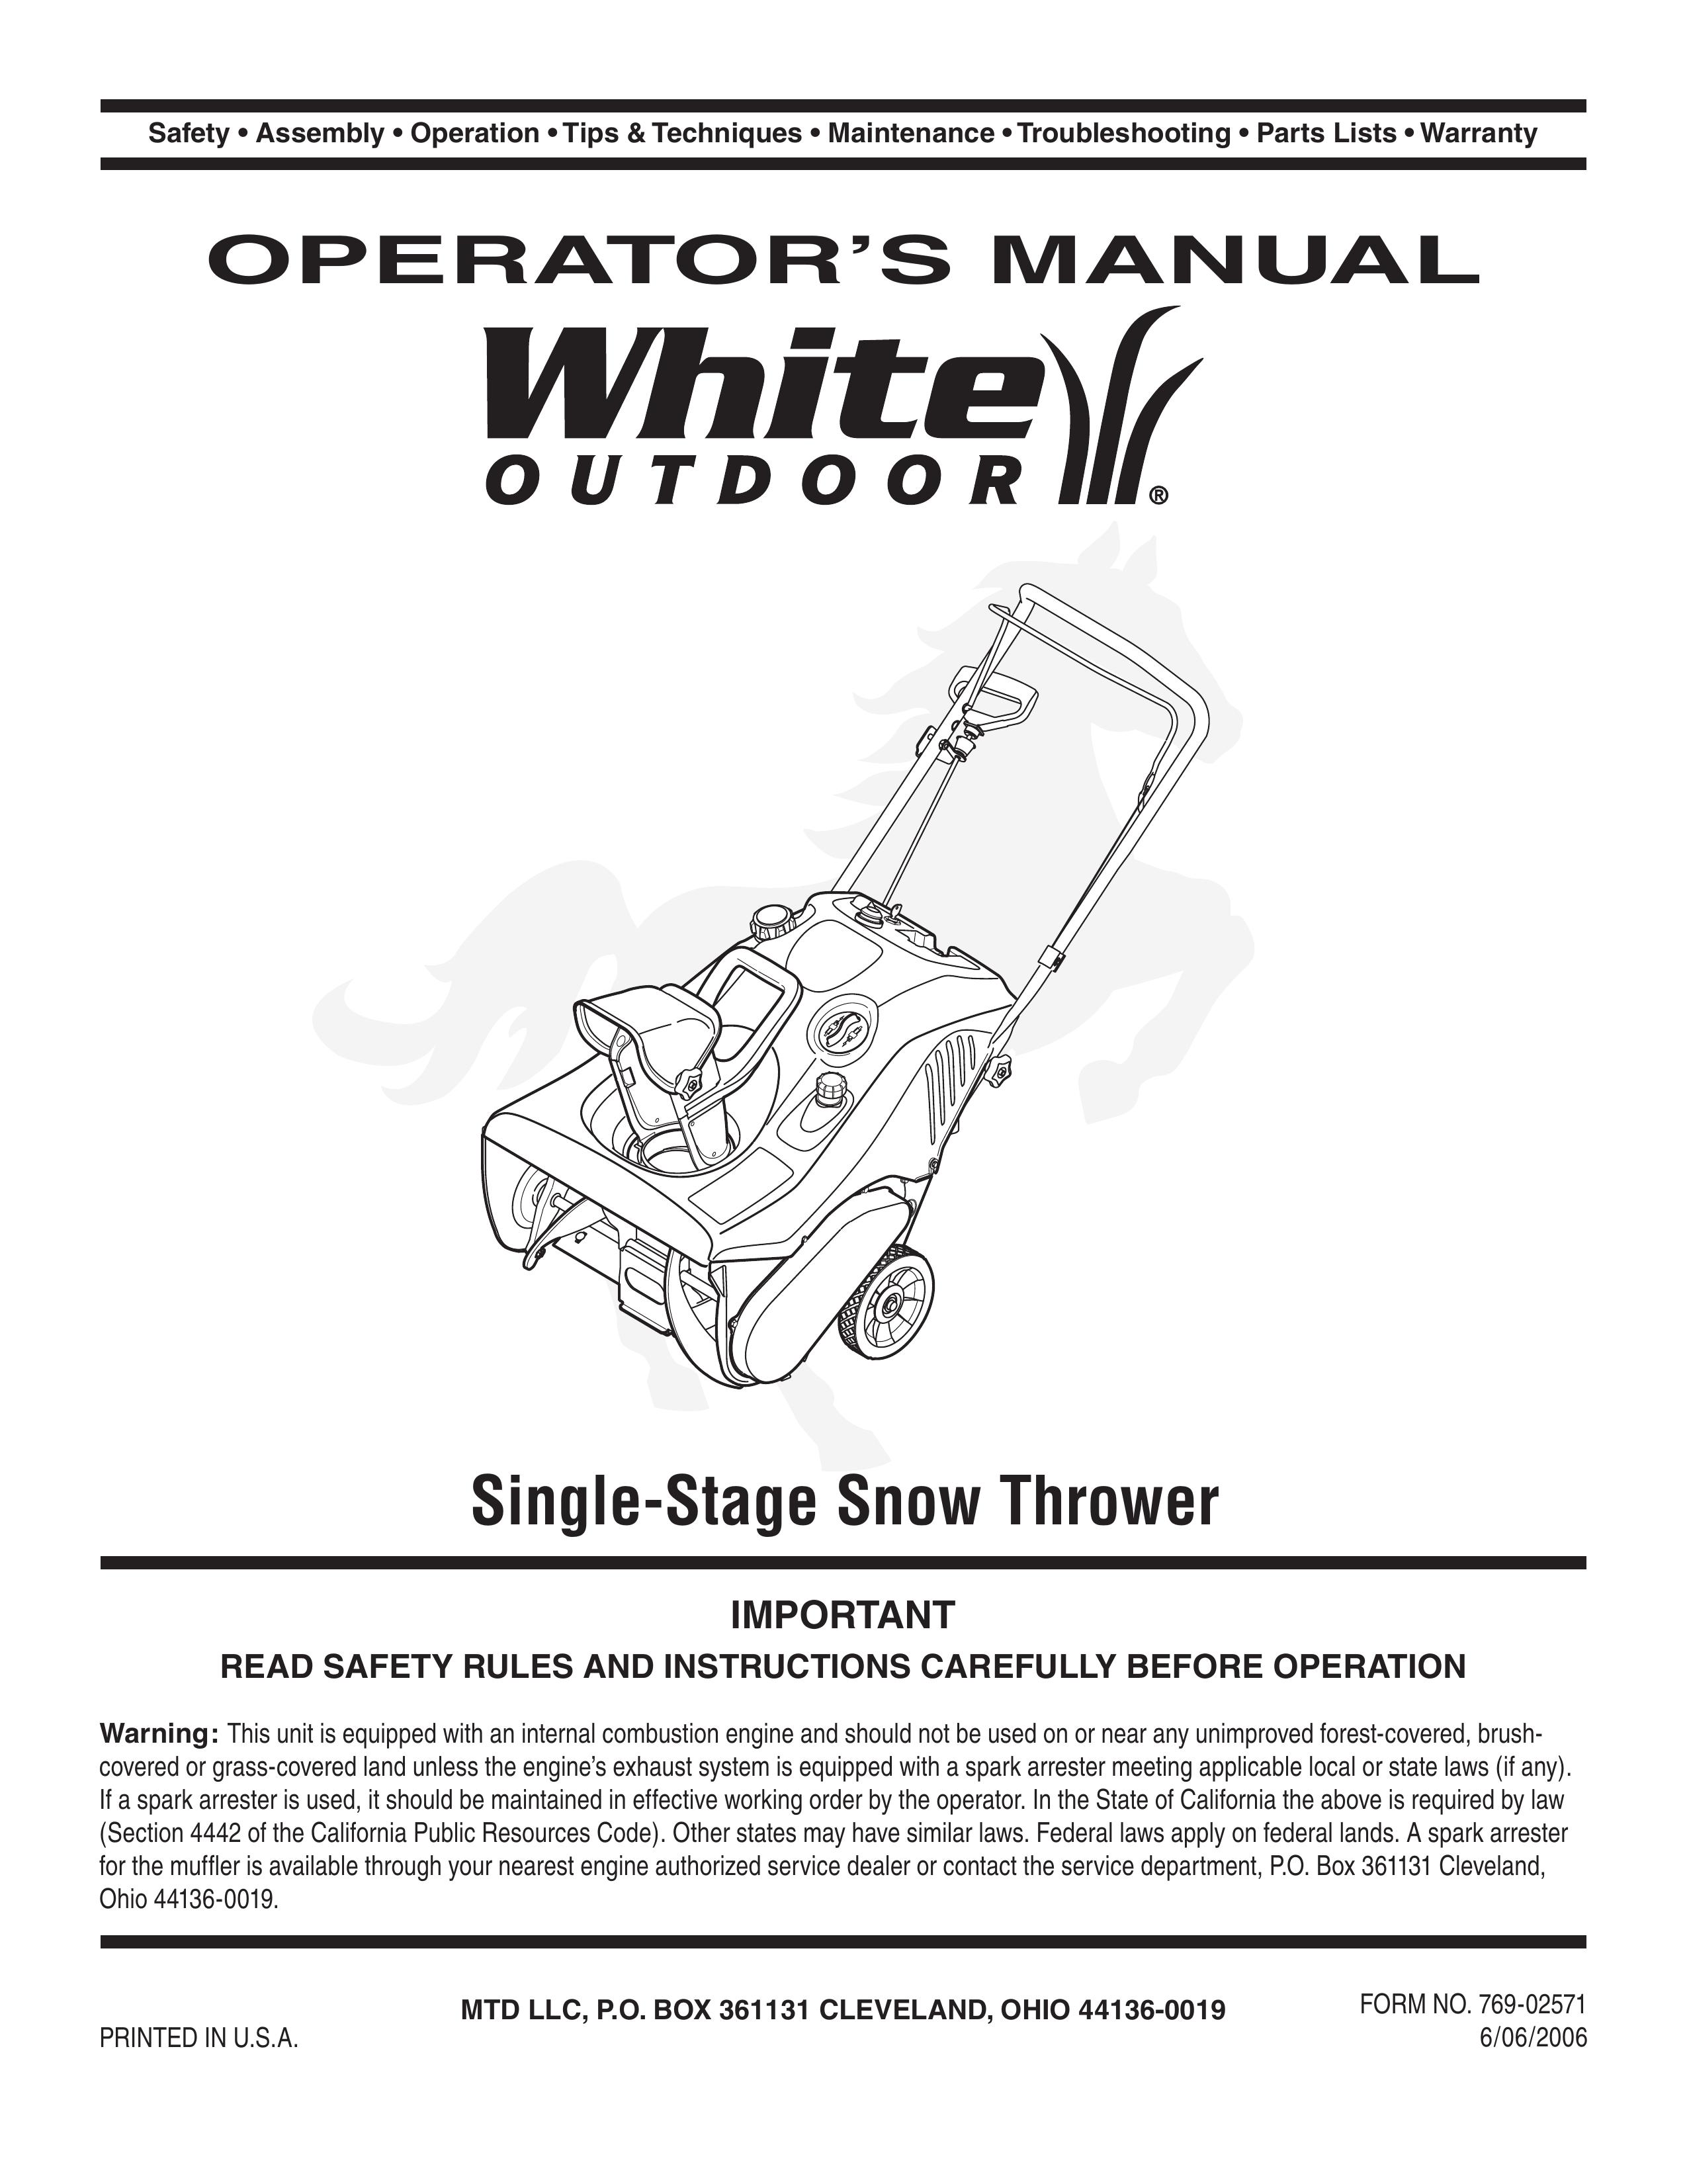 White Outdoor Single-Stage Snow Thrower Snow Blower User Manual